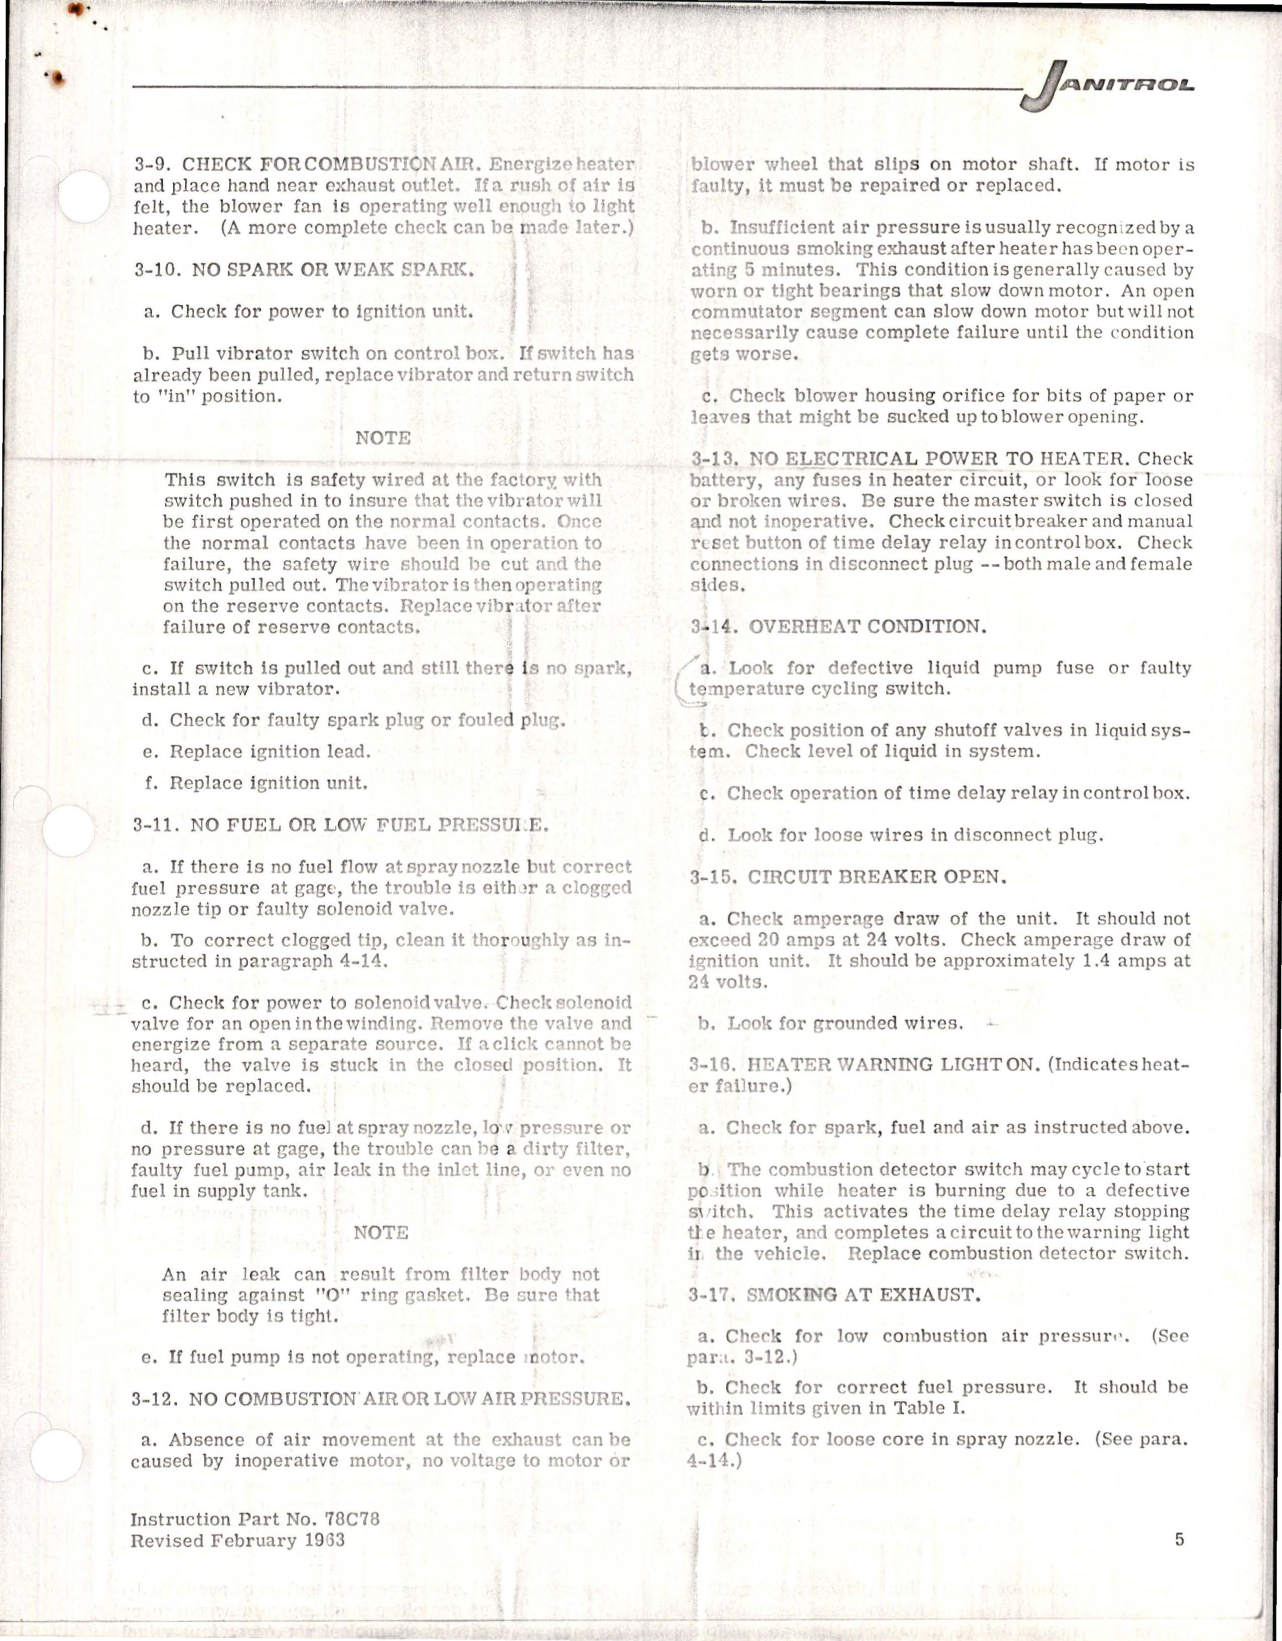 Sample page 5 from AirCorps Library document: Maintenance Instructions for Liquid Heater Assembly - Parts 36C75, A36C75, and B36C75